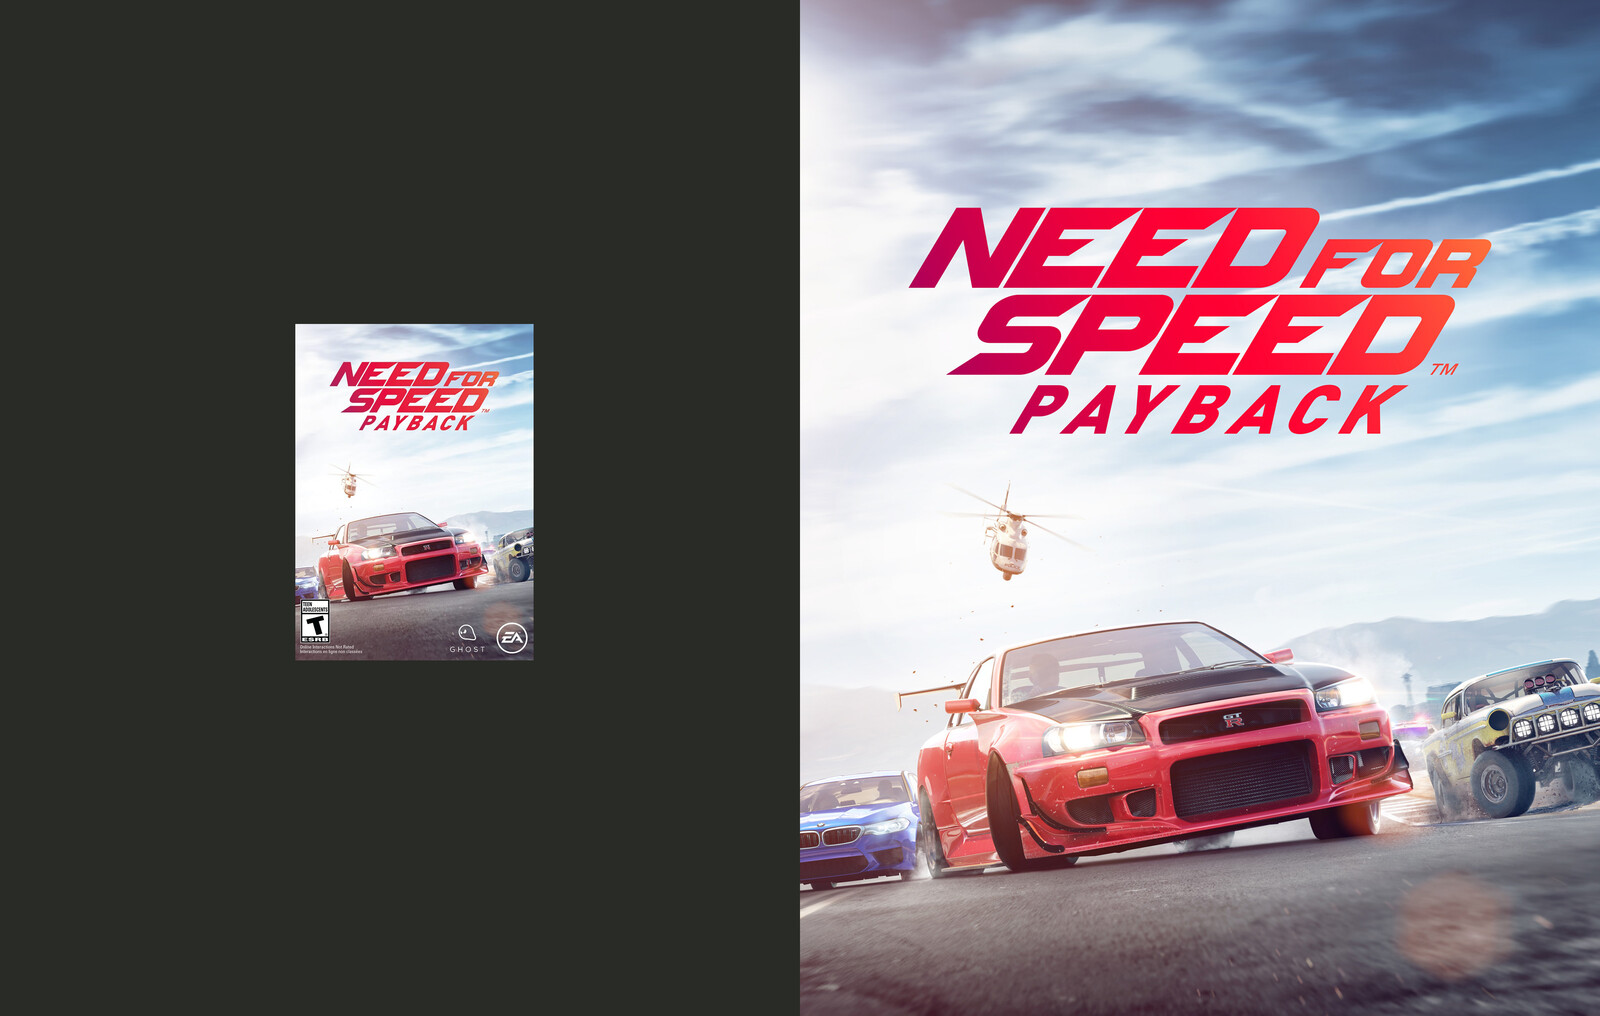 Need for Speed Payback (Original Scan vs. Poster format)